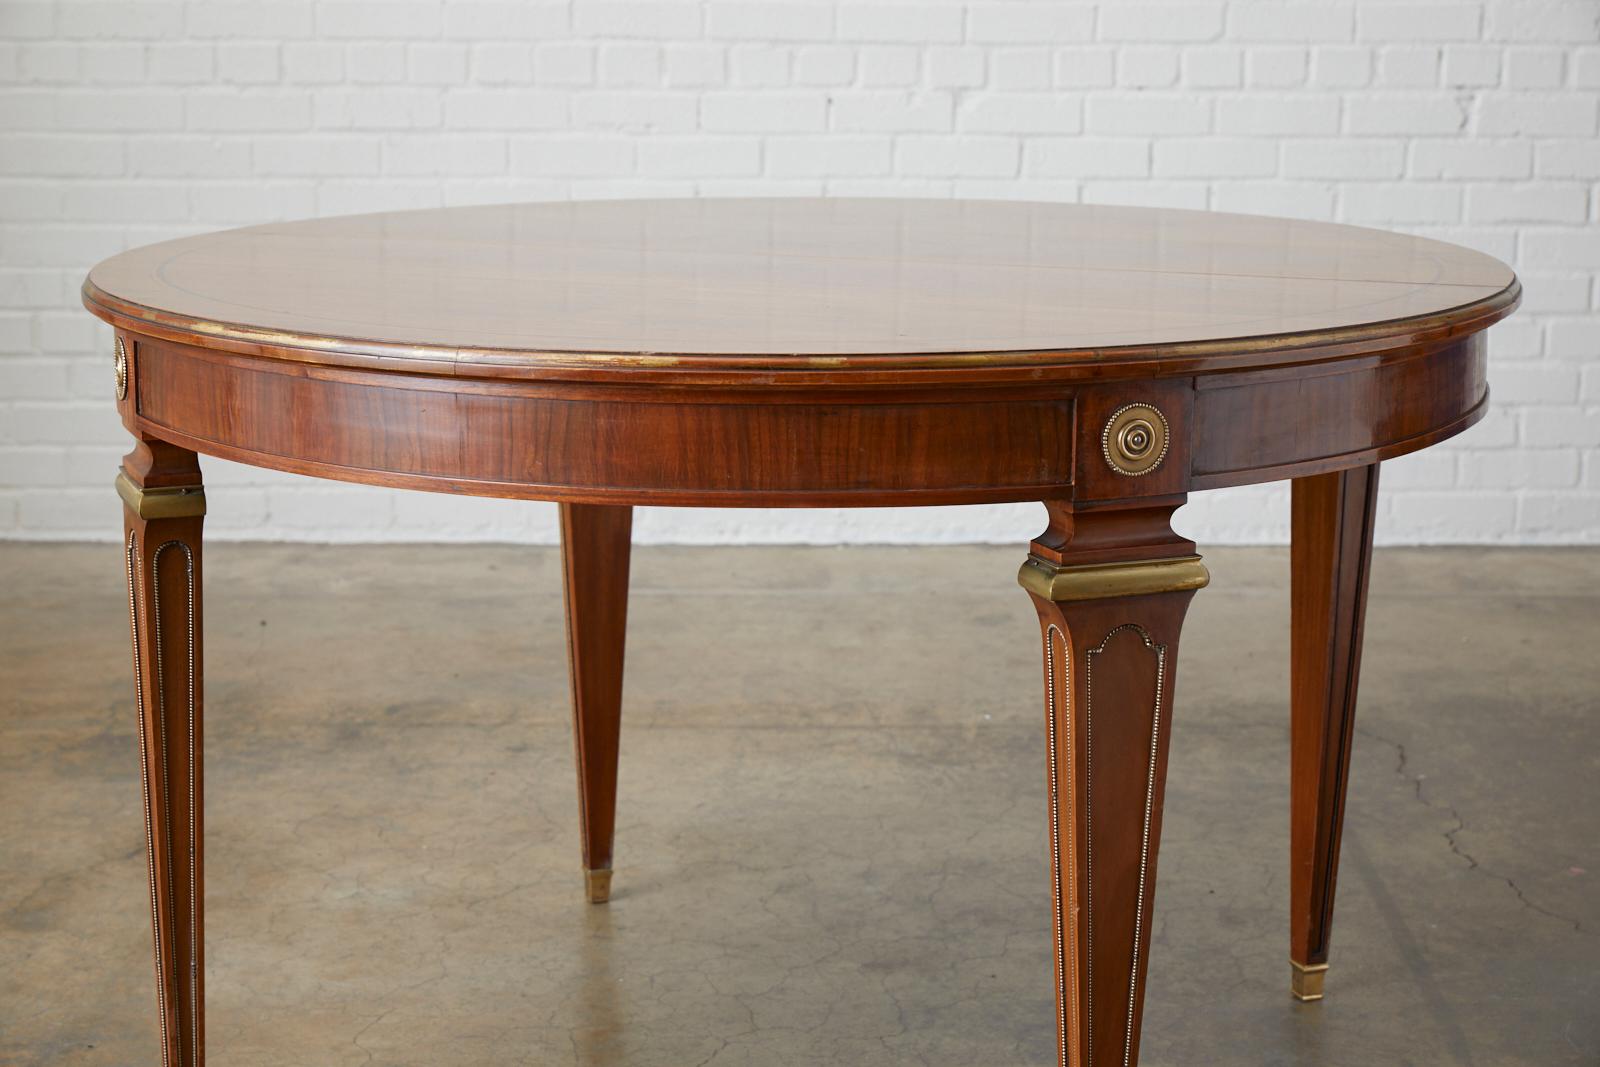 Hand-Crafted Maison Jansen Round Mahogany Dining Table with Leaf